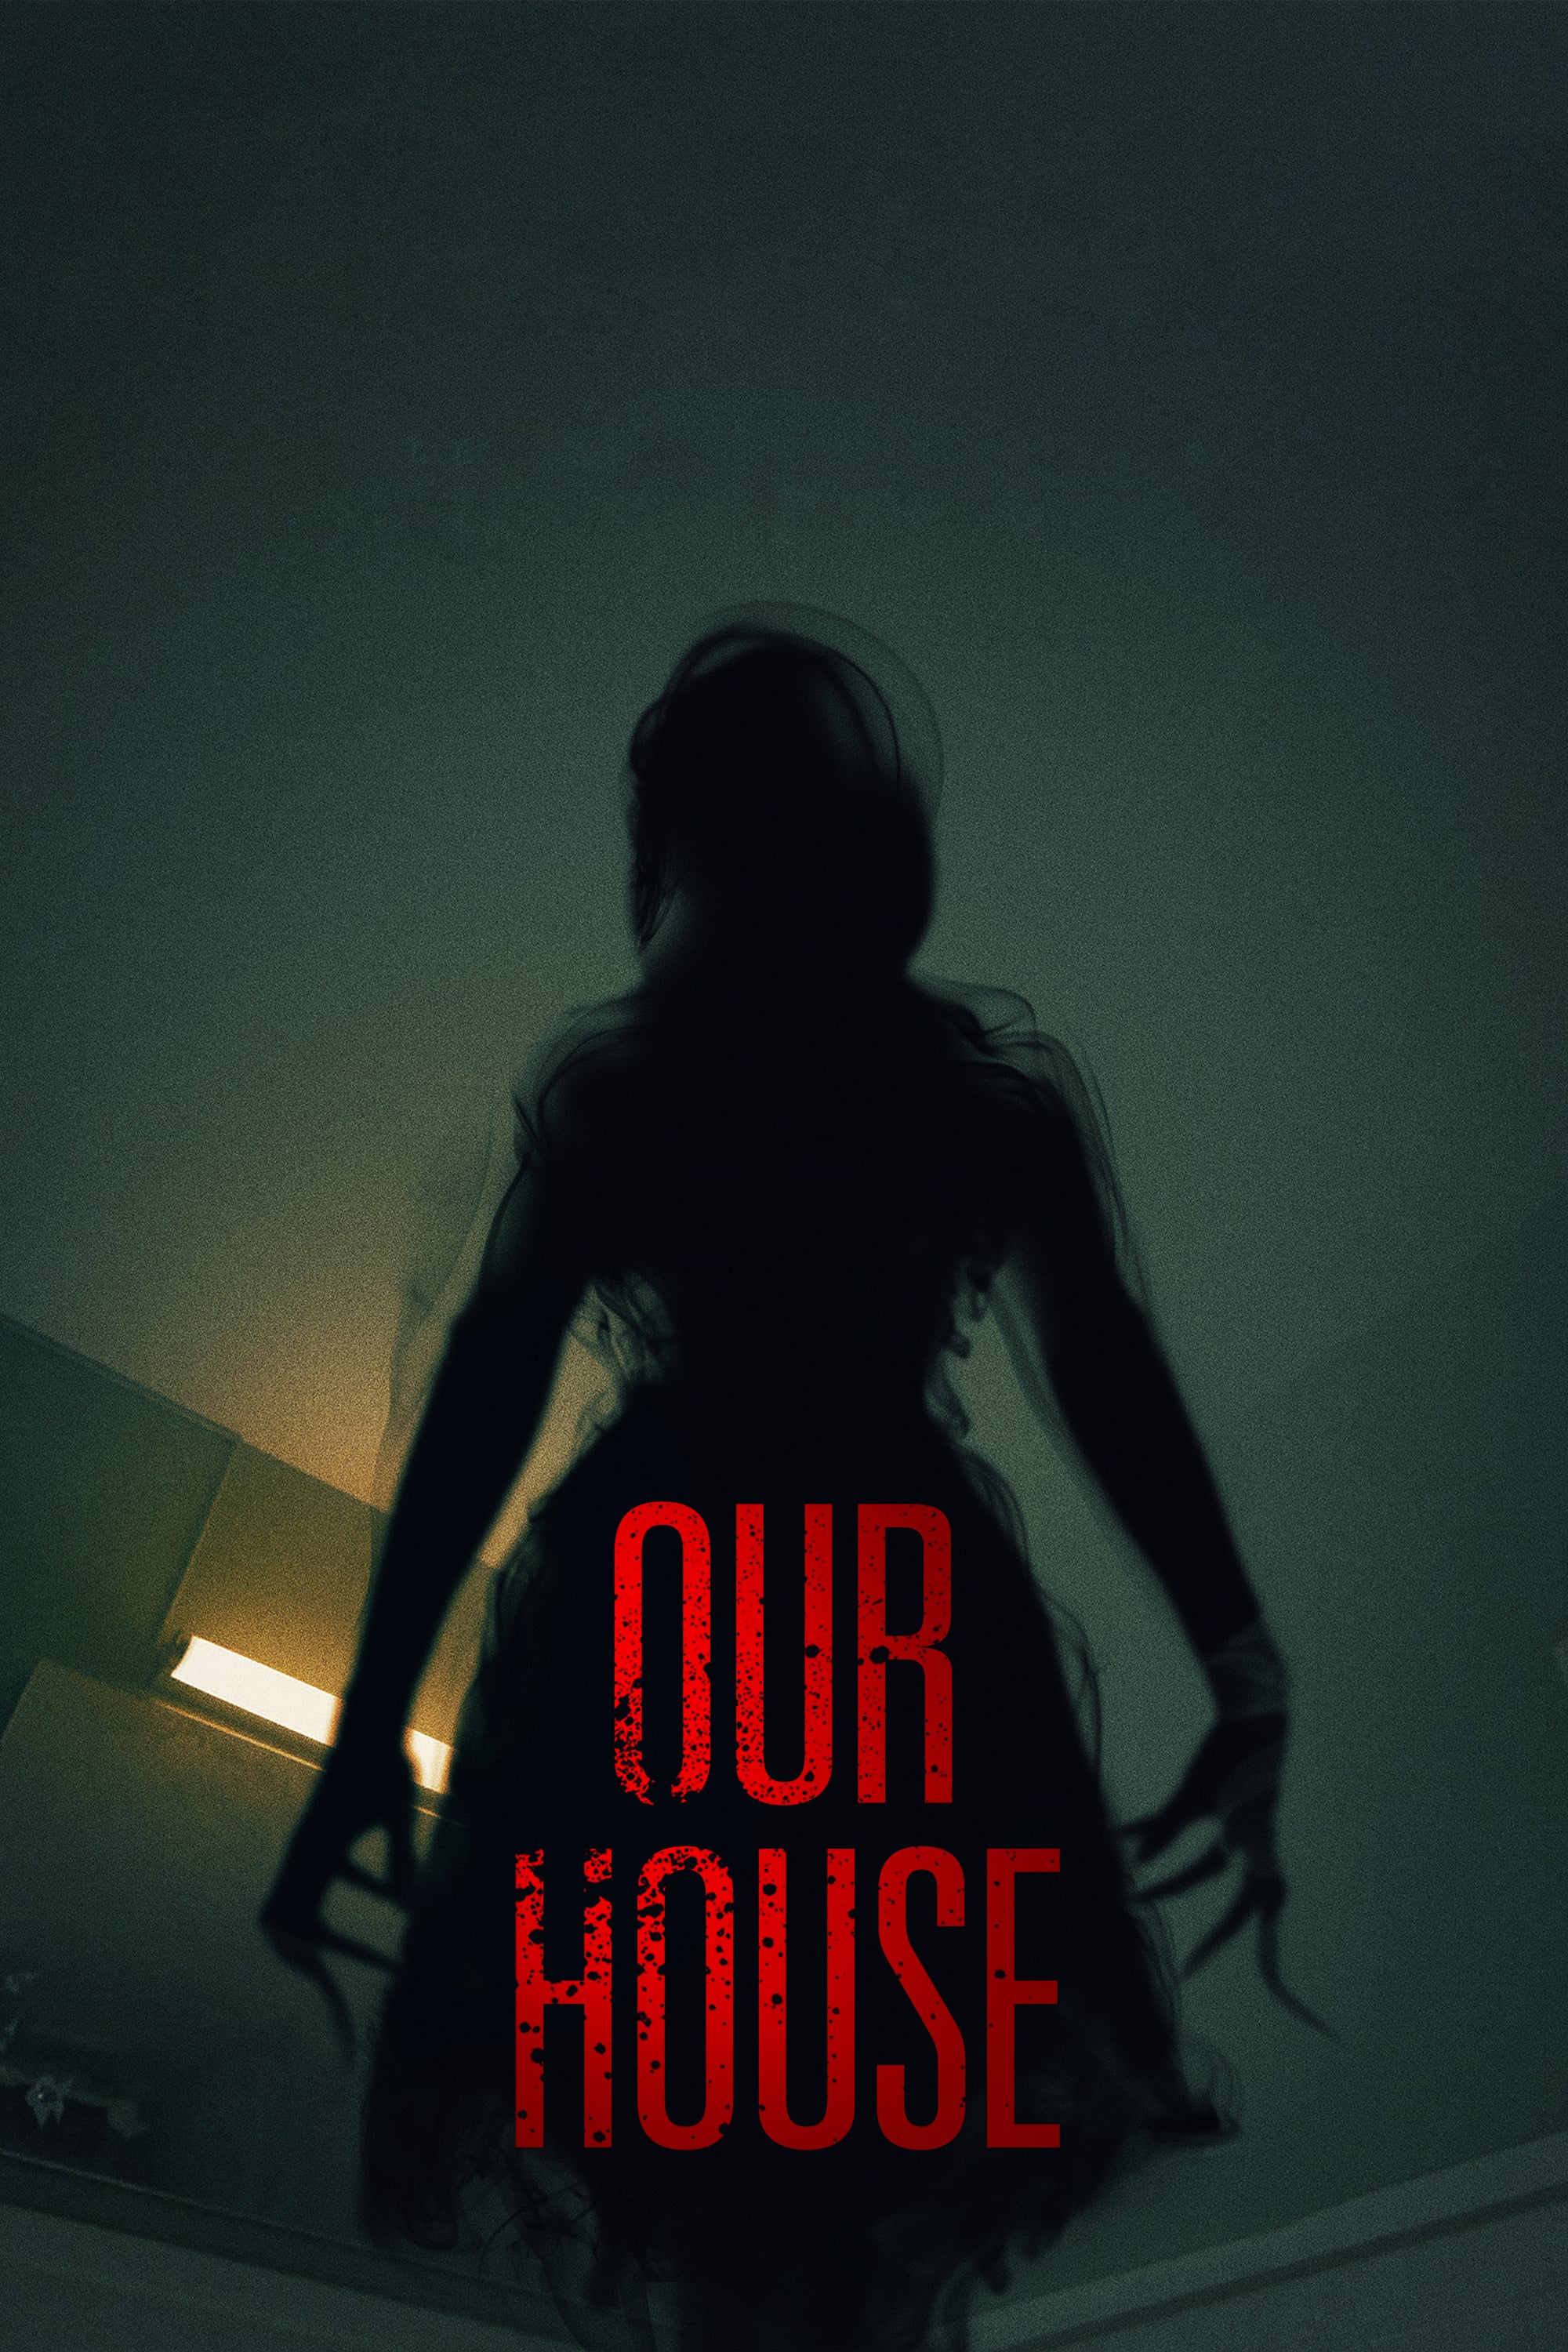 Our House เครื่องเรียกผี (2018)